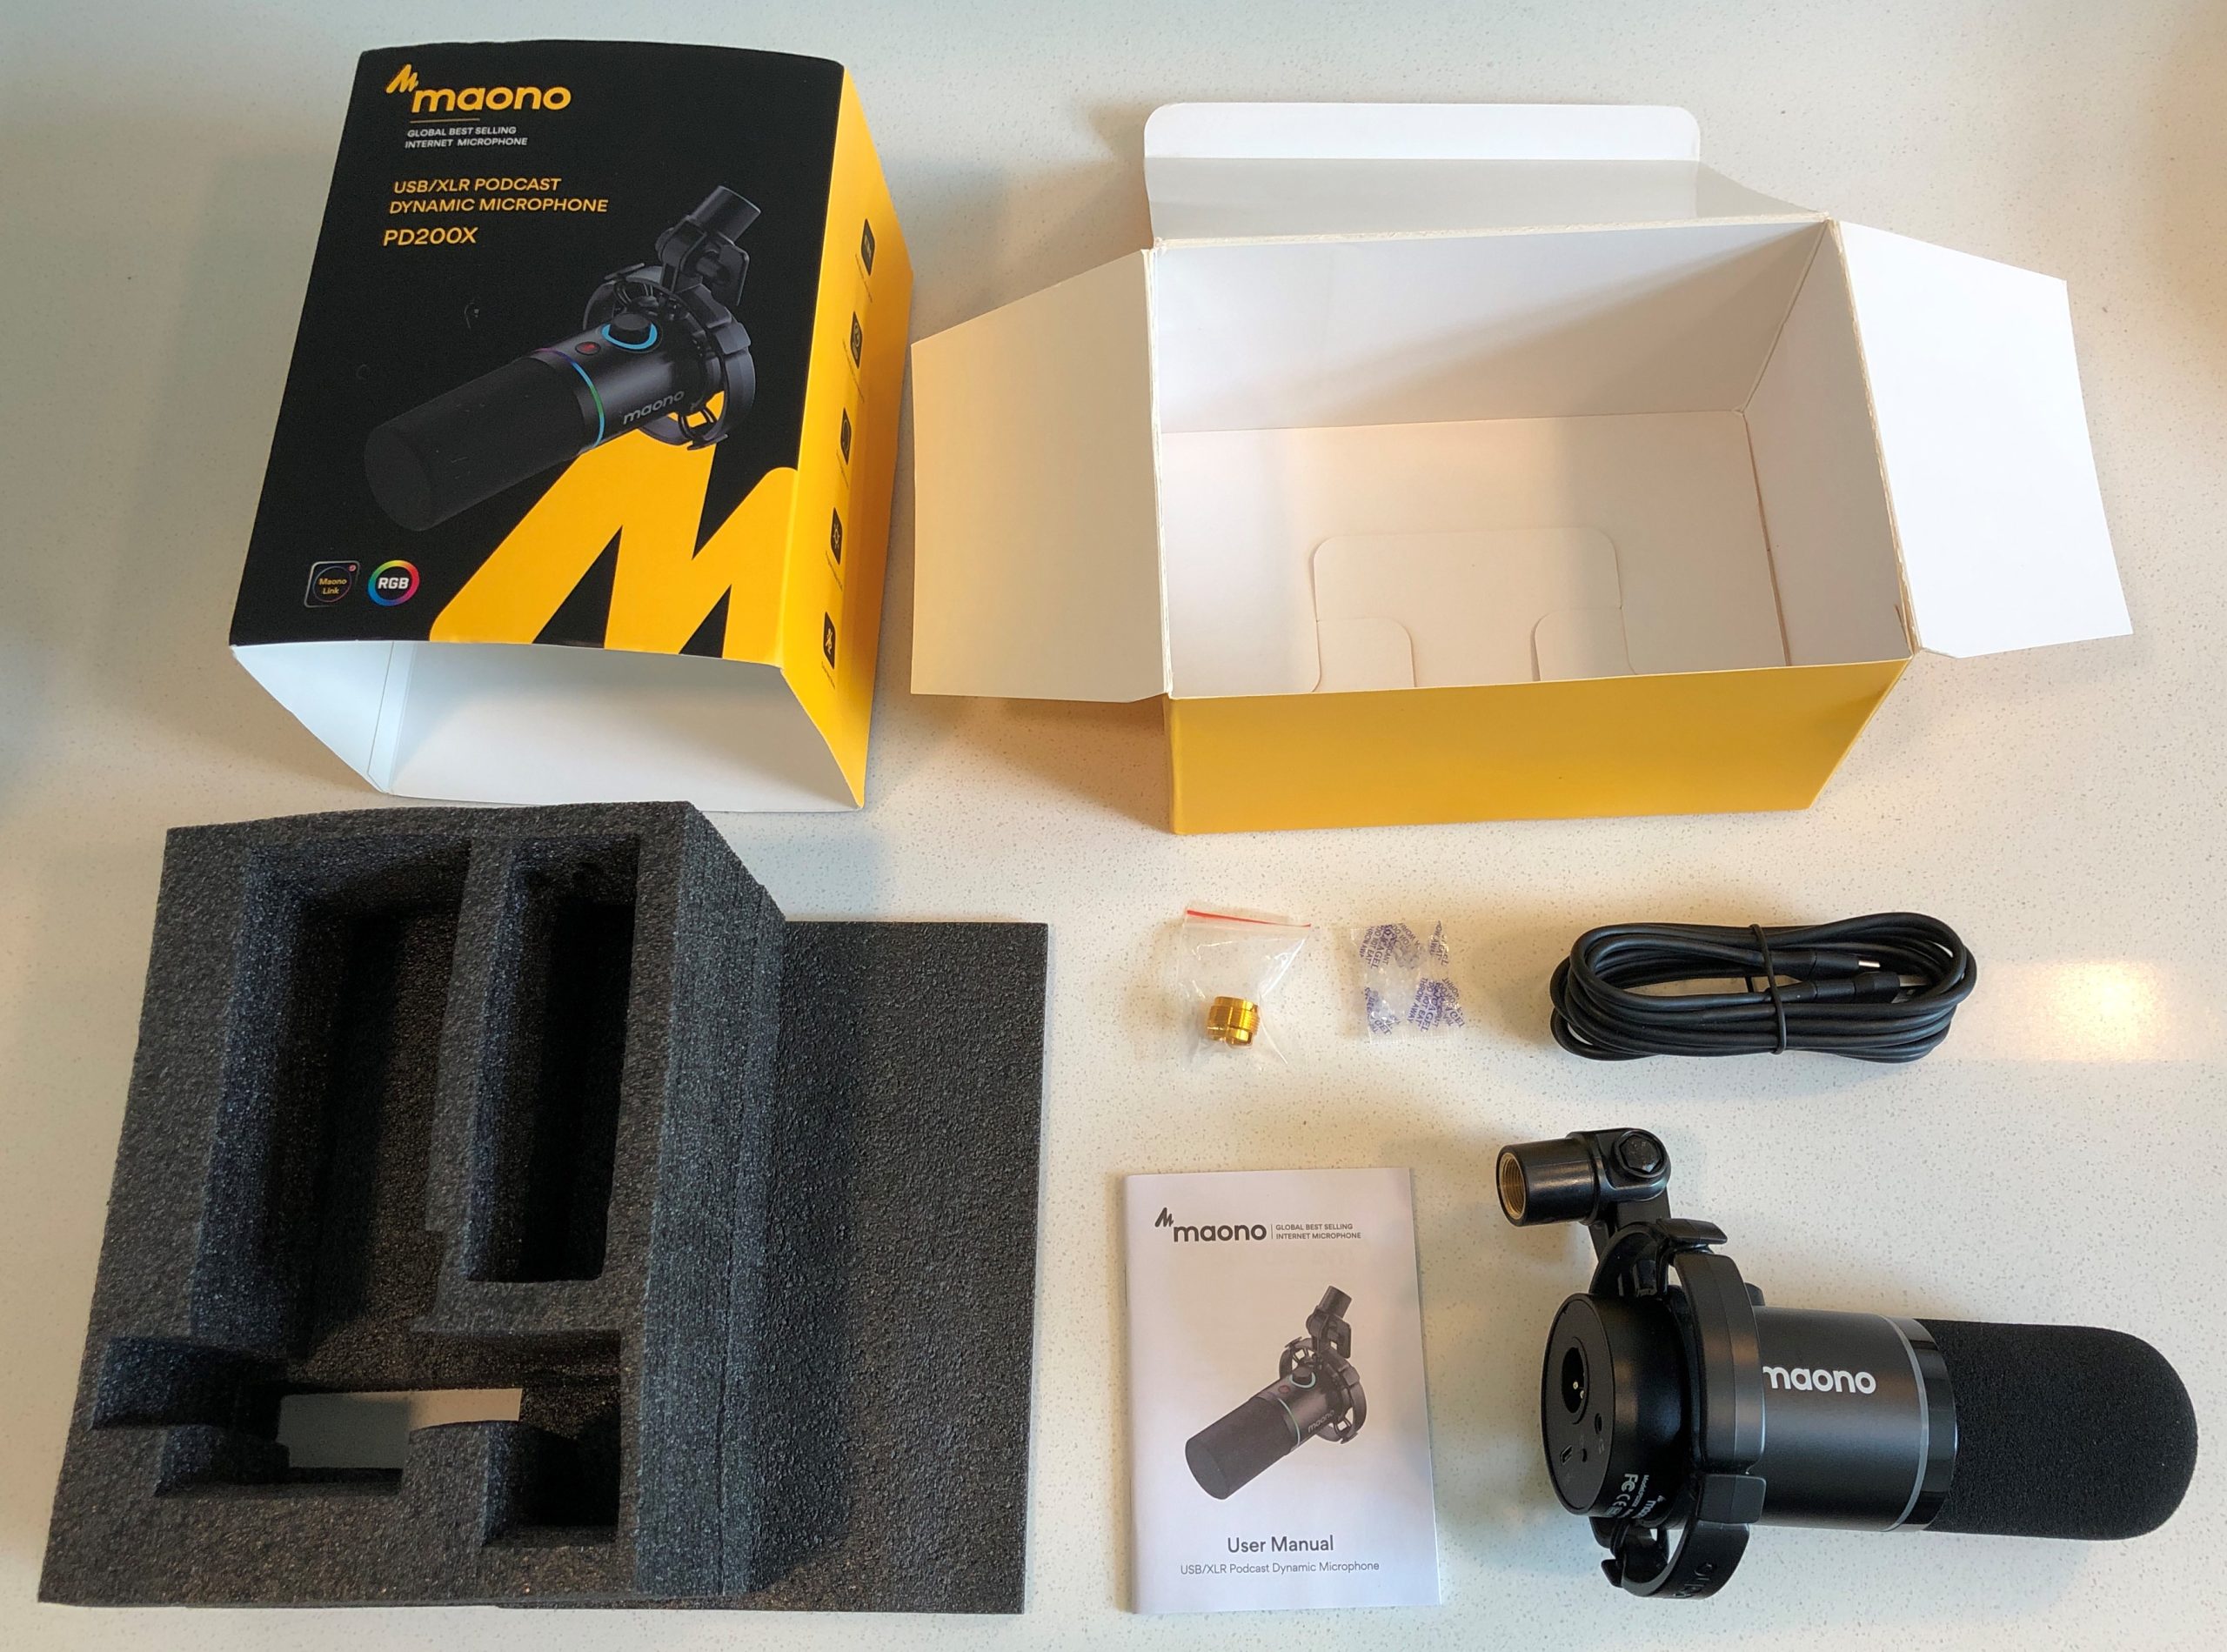 MAONO PD200X microphone out of the box accessories